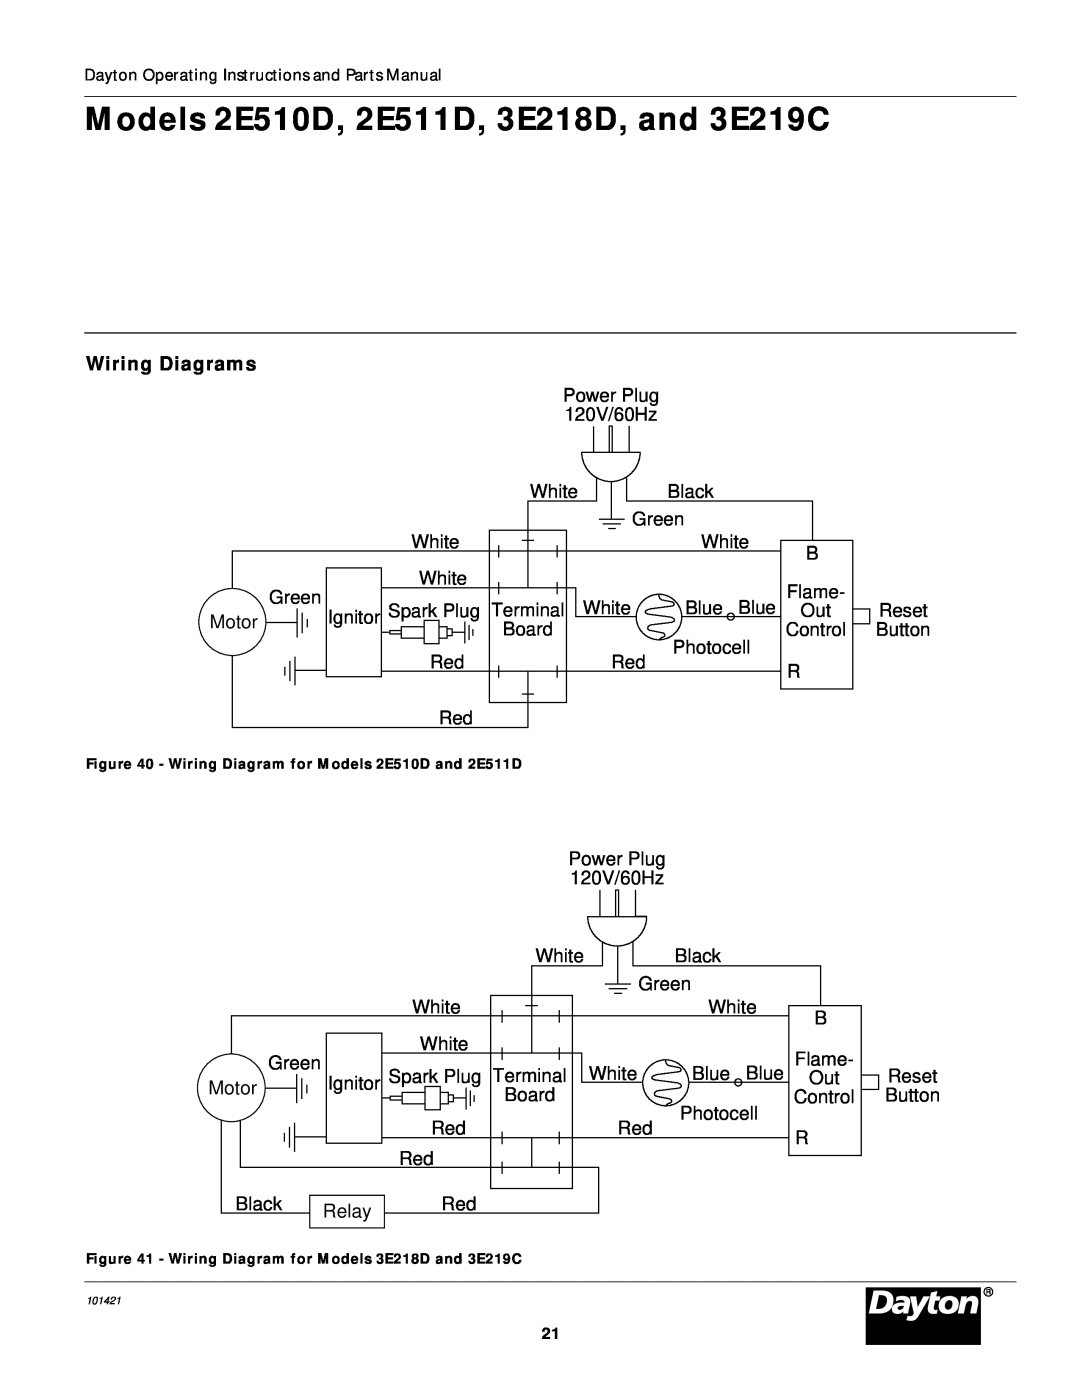 Dayton specifications Models 2E510D, 2E511D, 3E218D, and 3E219C, Wiring Diagrams 